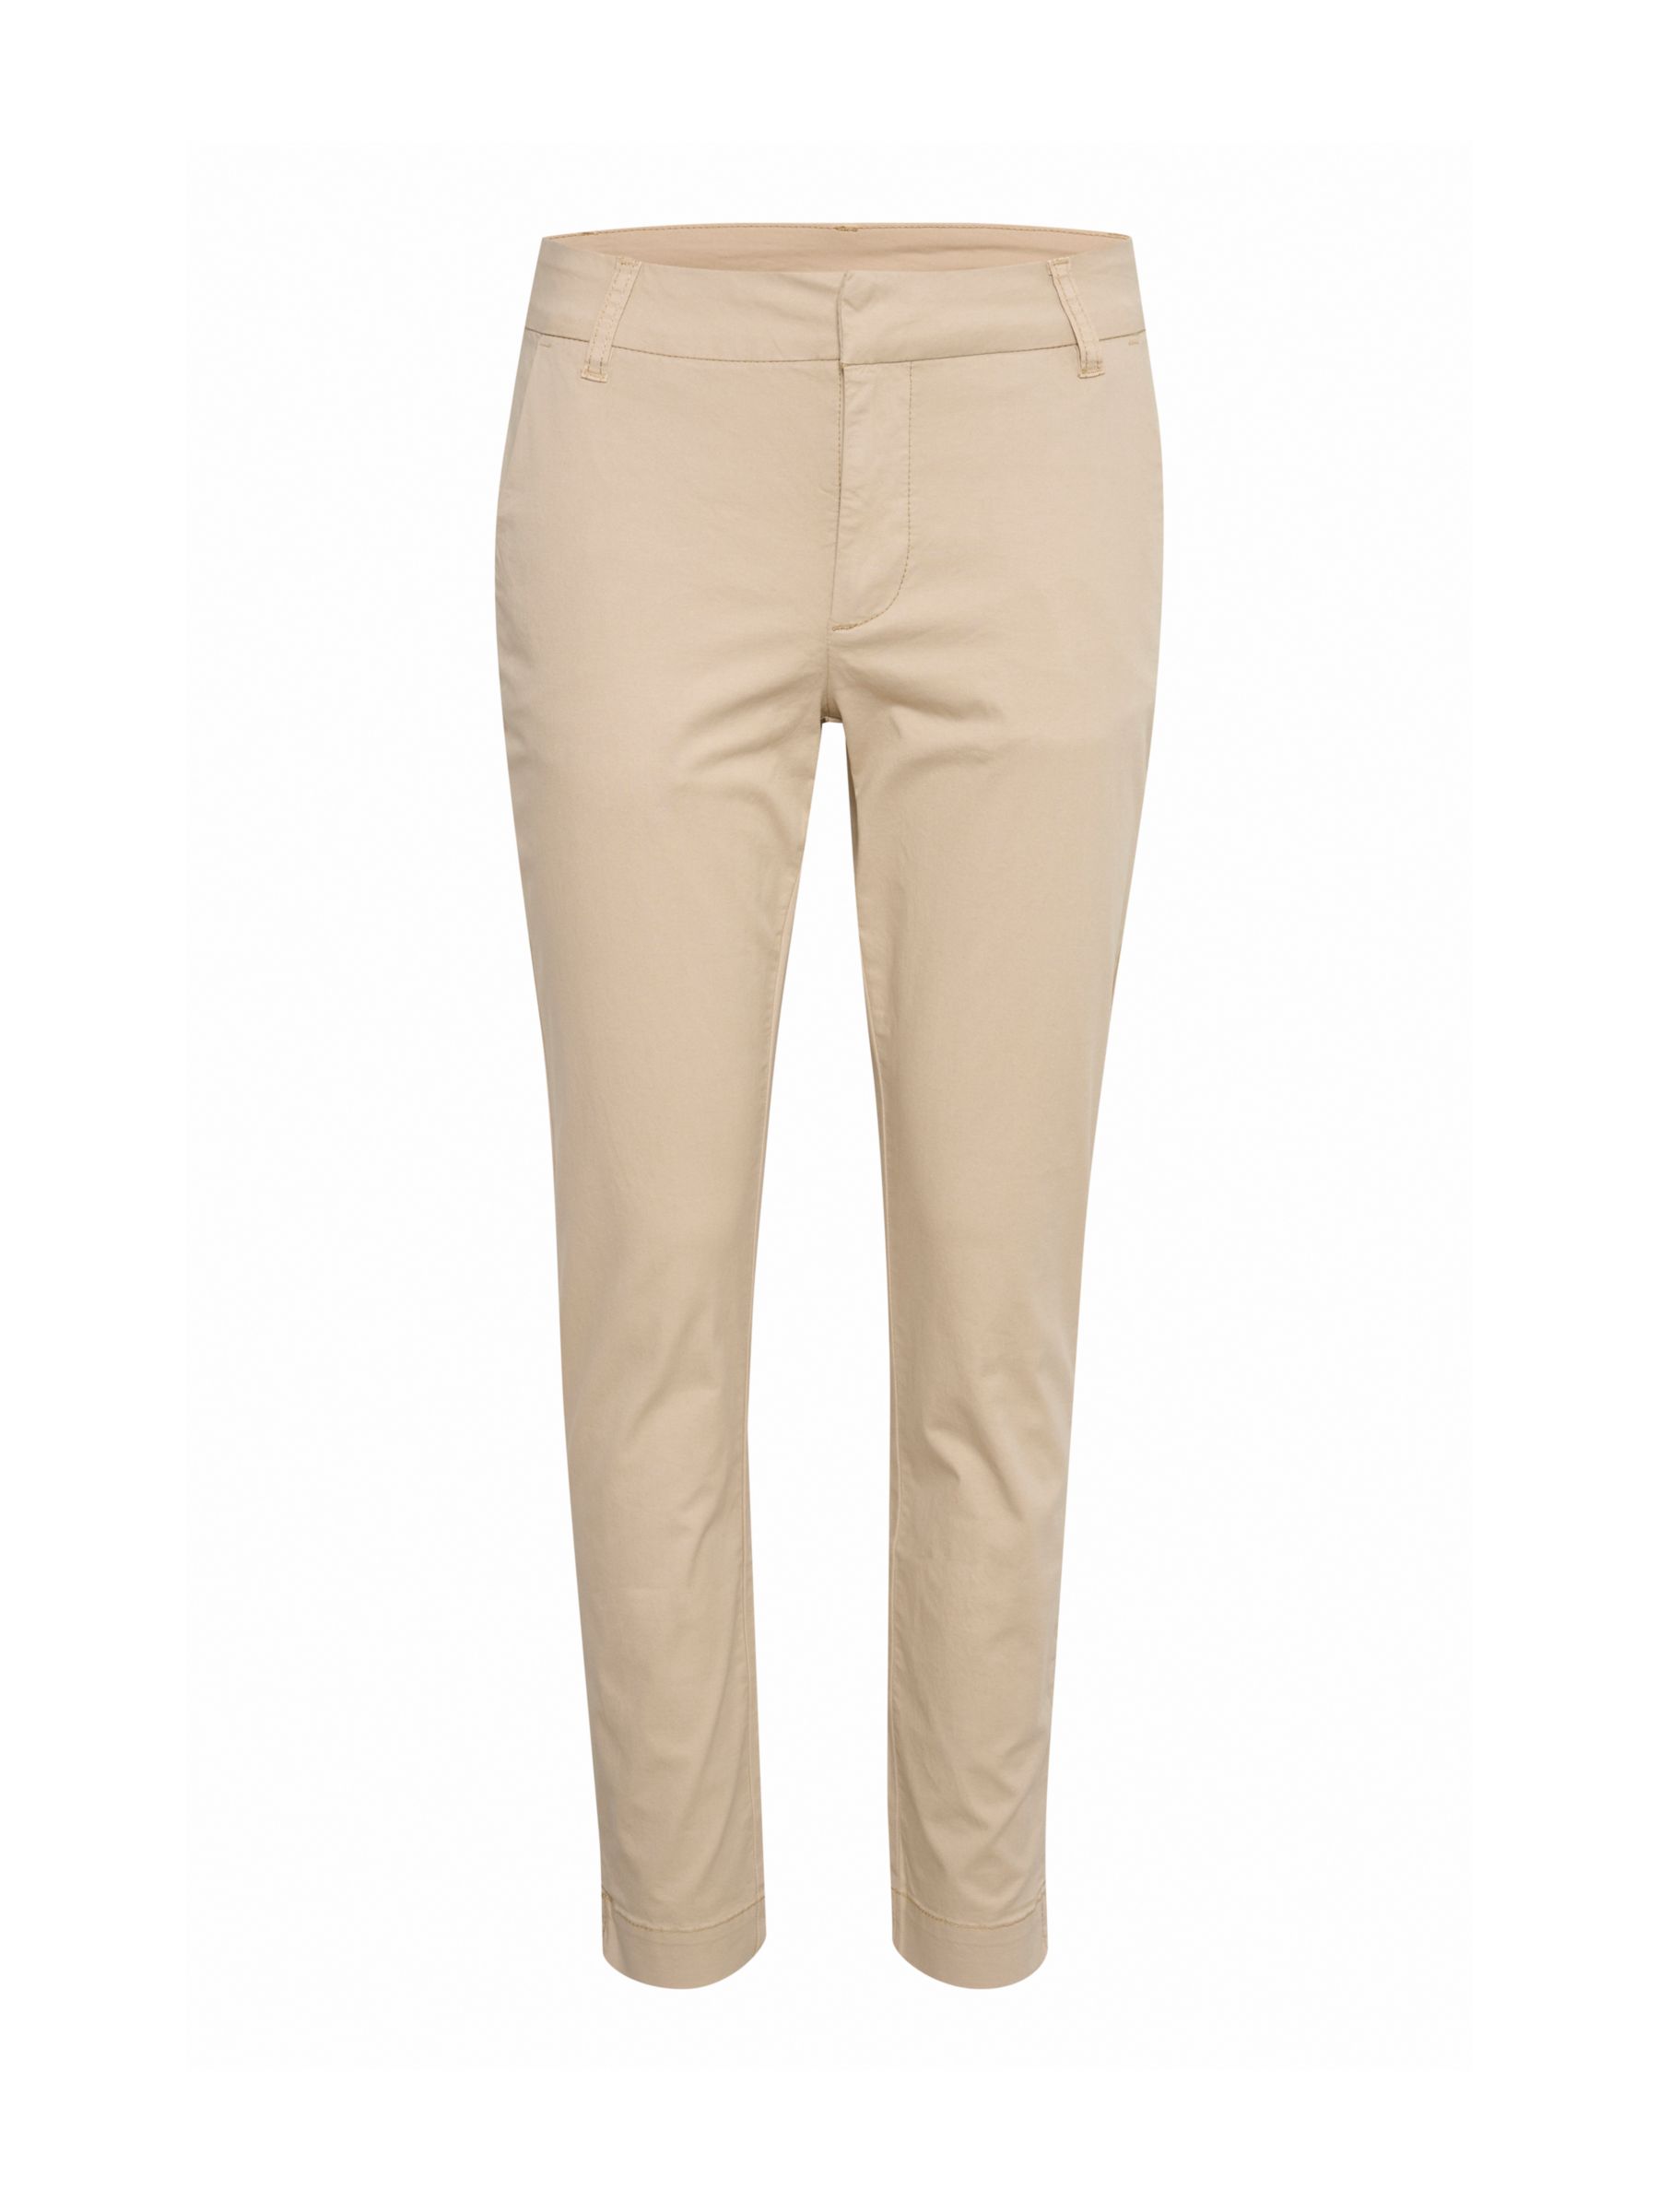 KAFFE Mette Slim Fit Trousers, Feather Grey at John Lewis & Partners